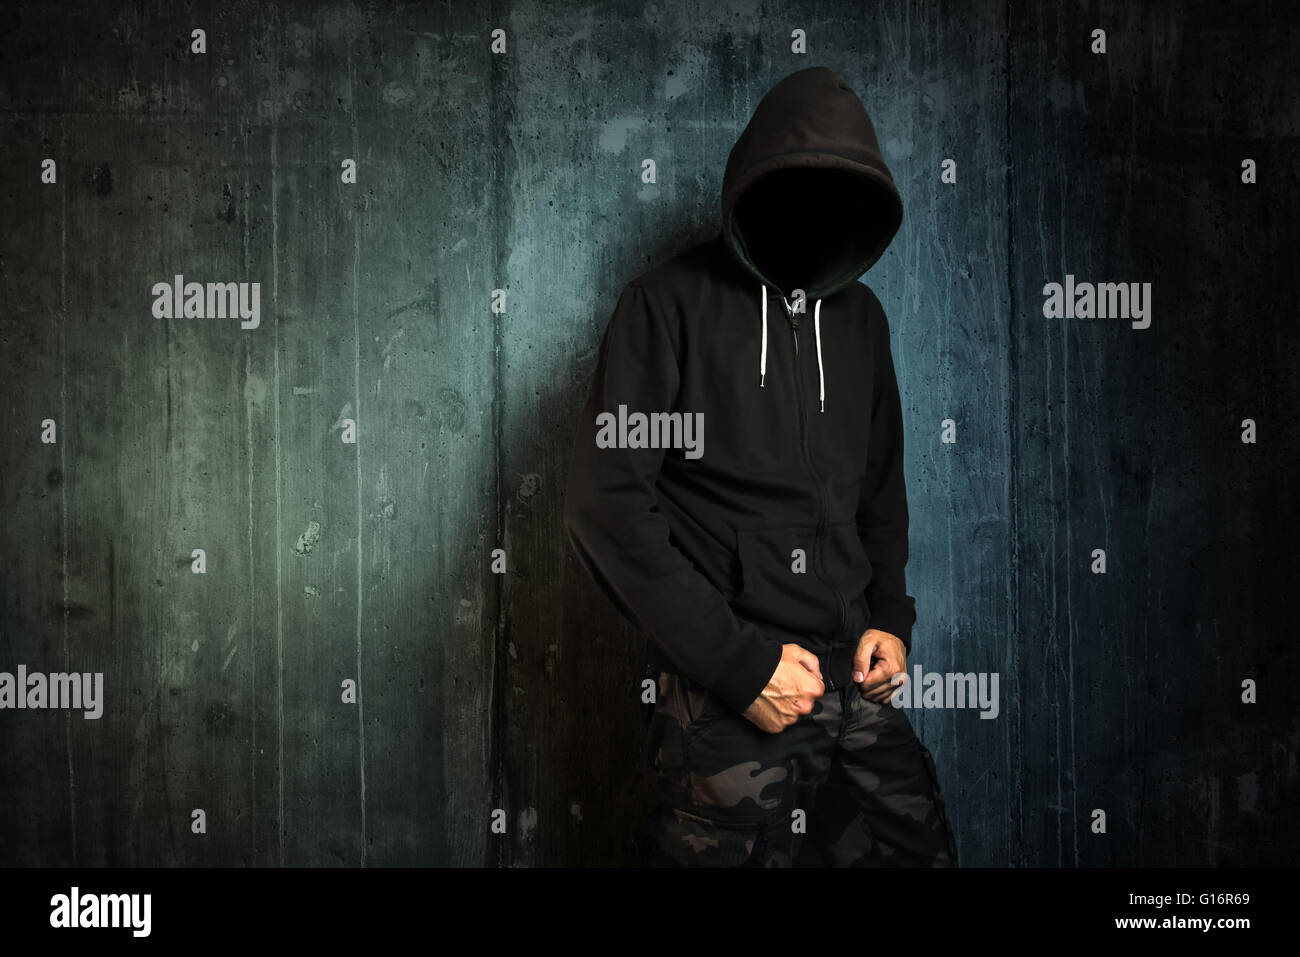 Dangerous unrecognizable faceless criminal standing in front of concrete wall, crime rate and gangster lifestyle concept. Stock Photo